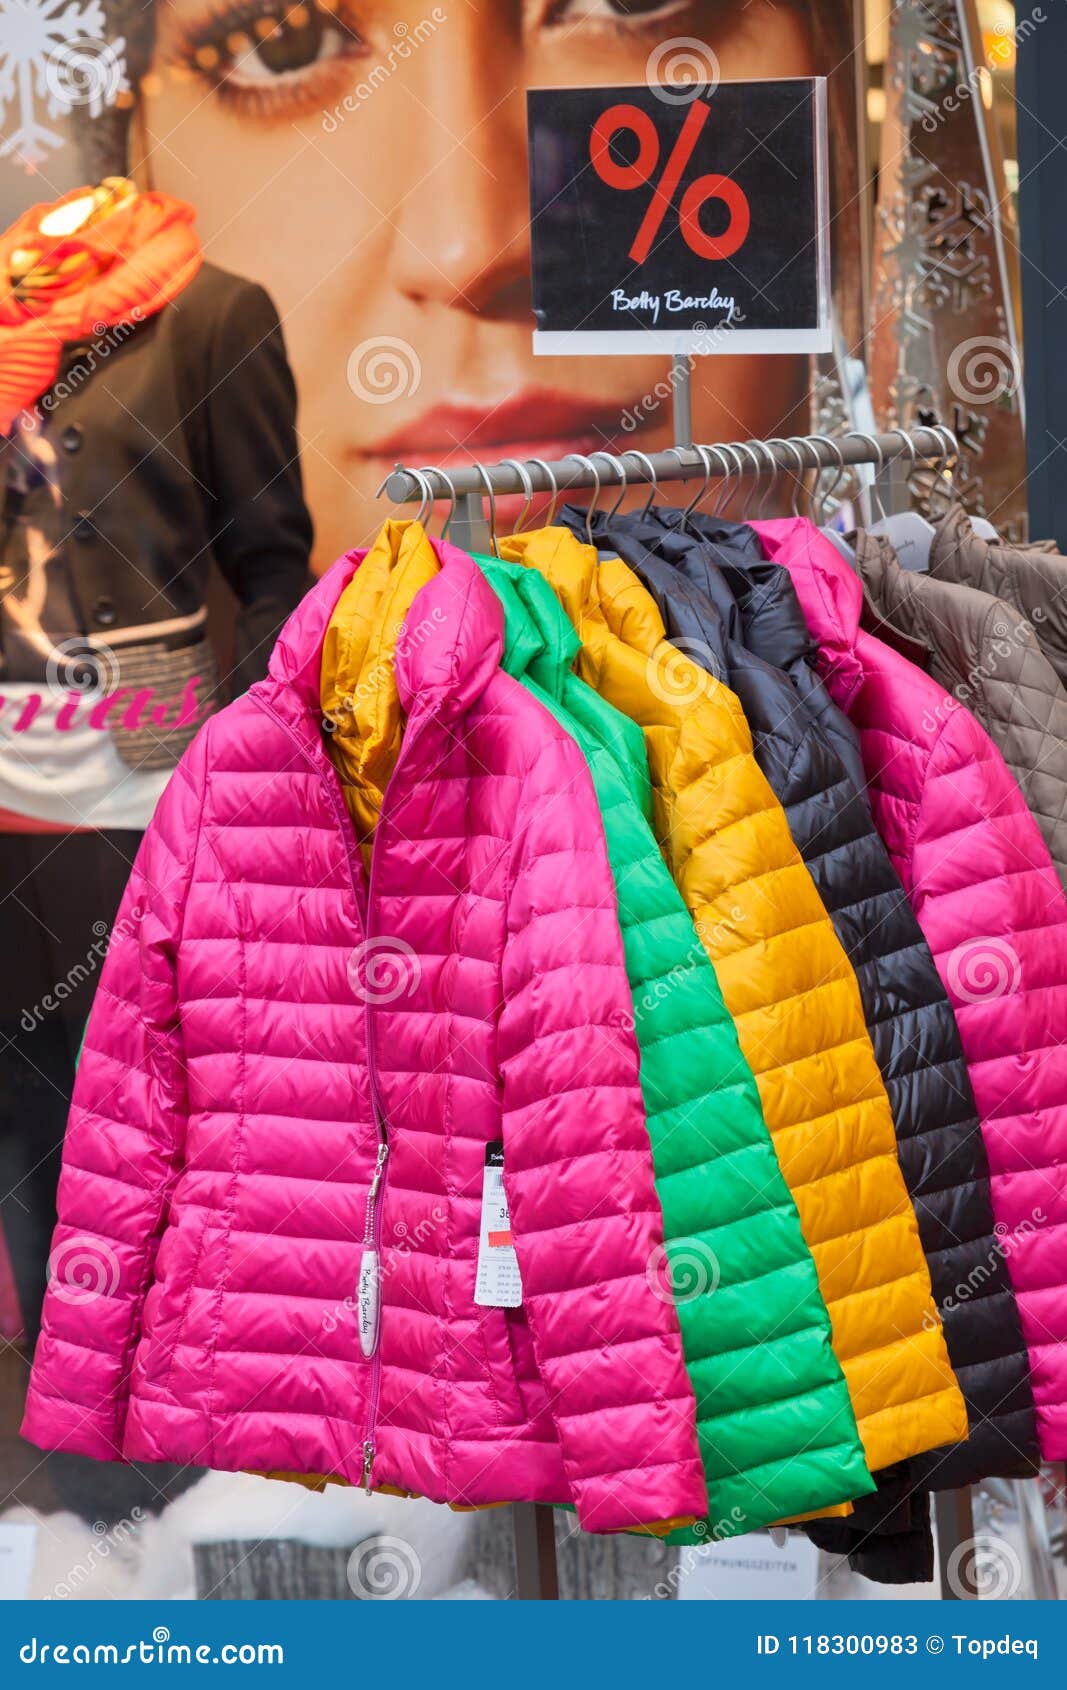 Winter Clothes Hanging at a Store Editorial Stock Photo - Image of ...